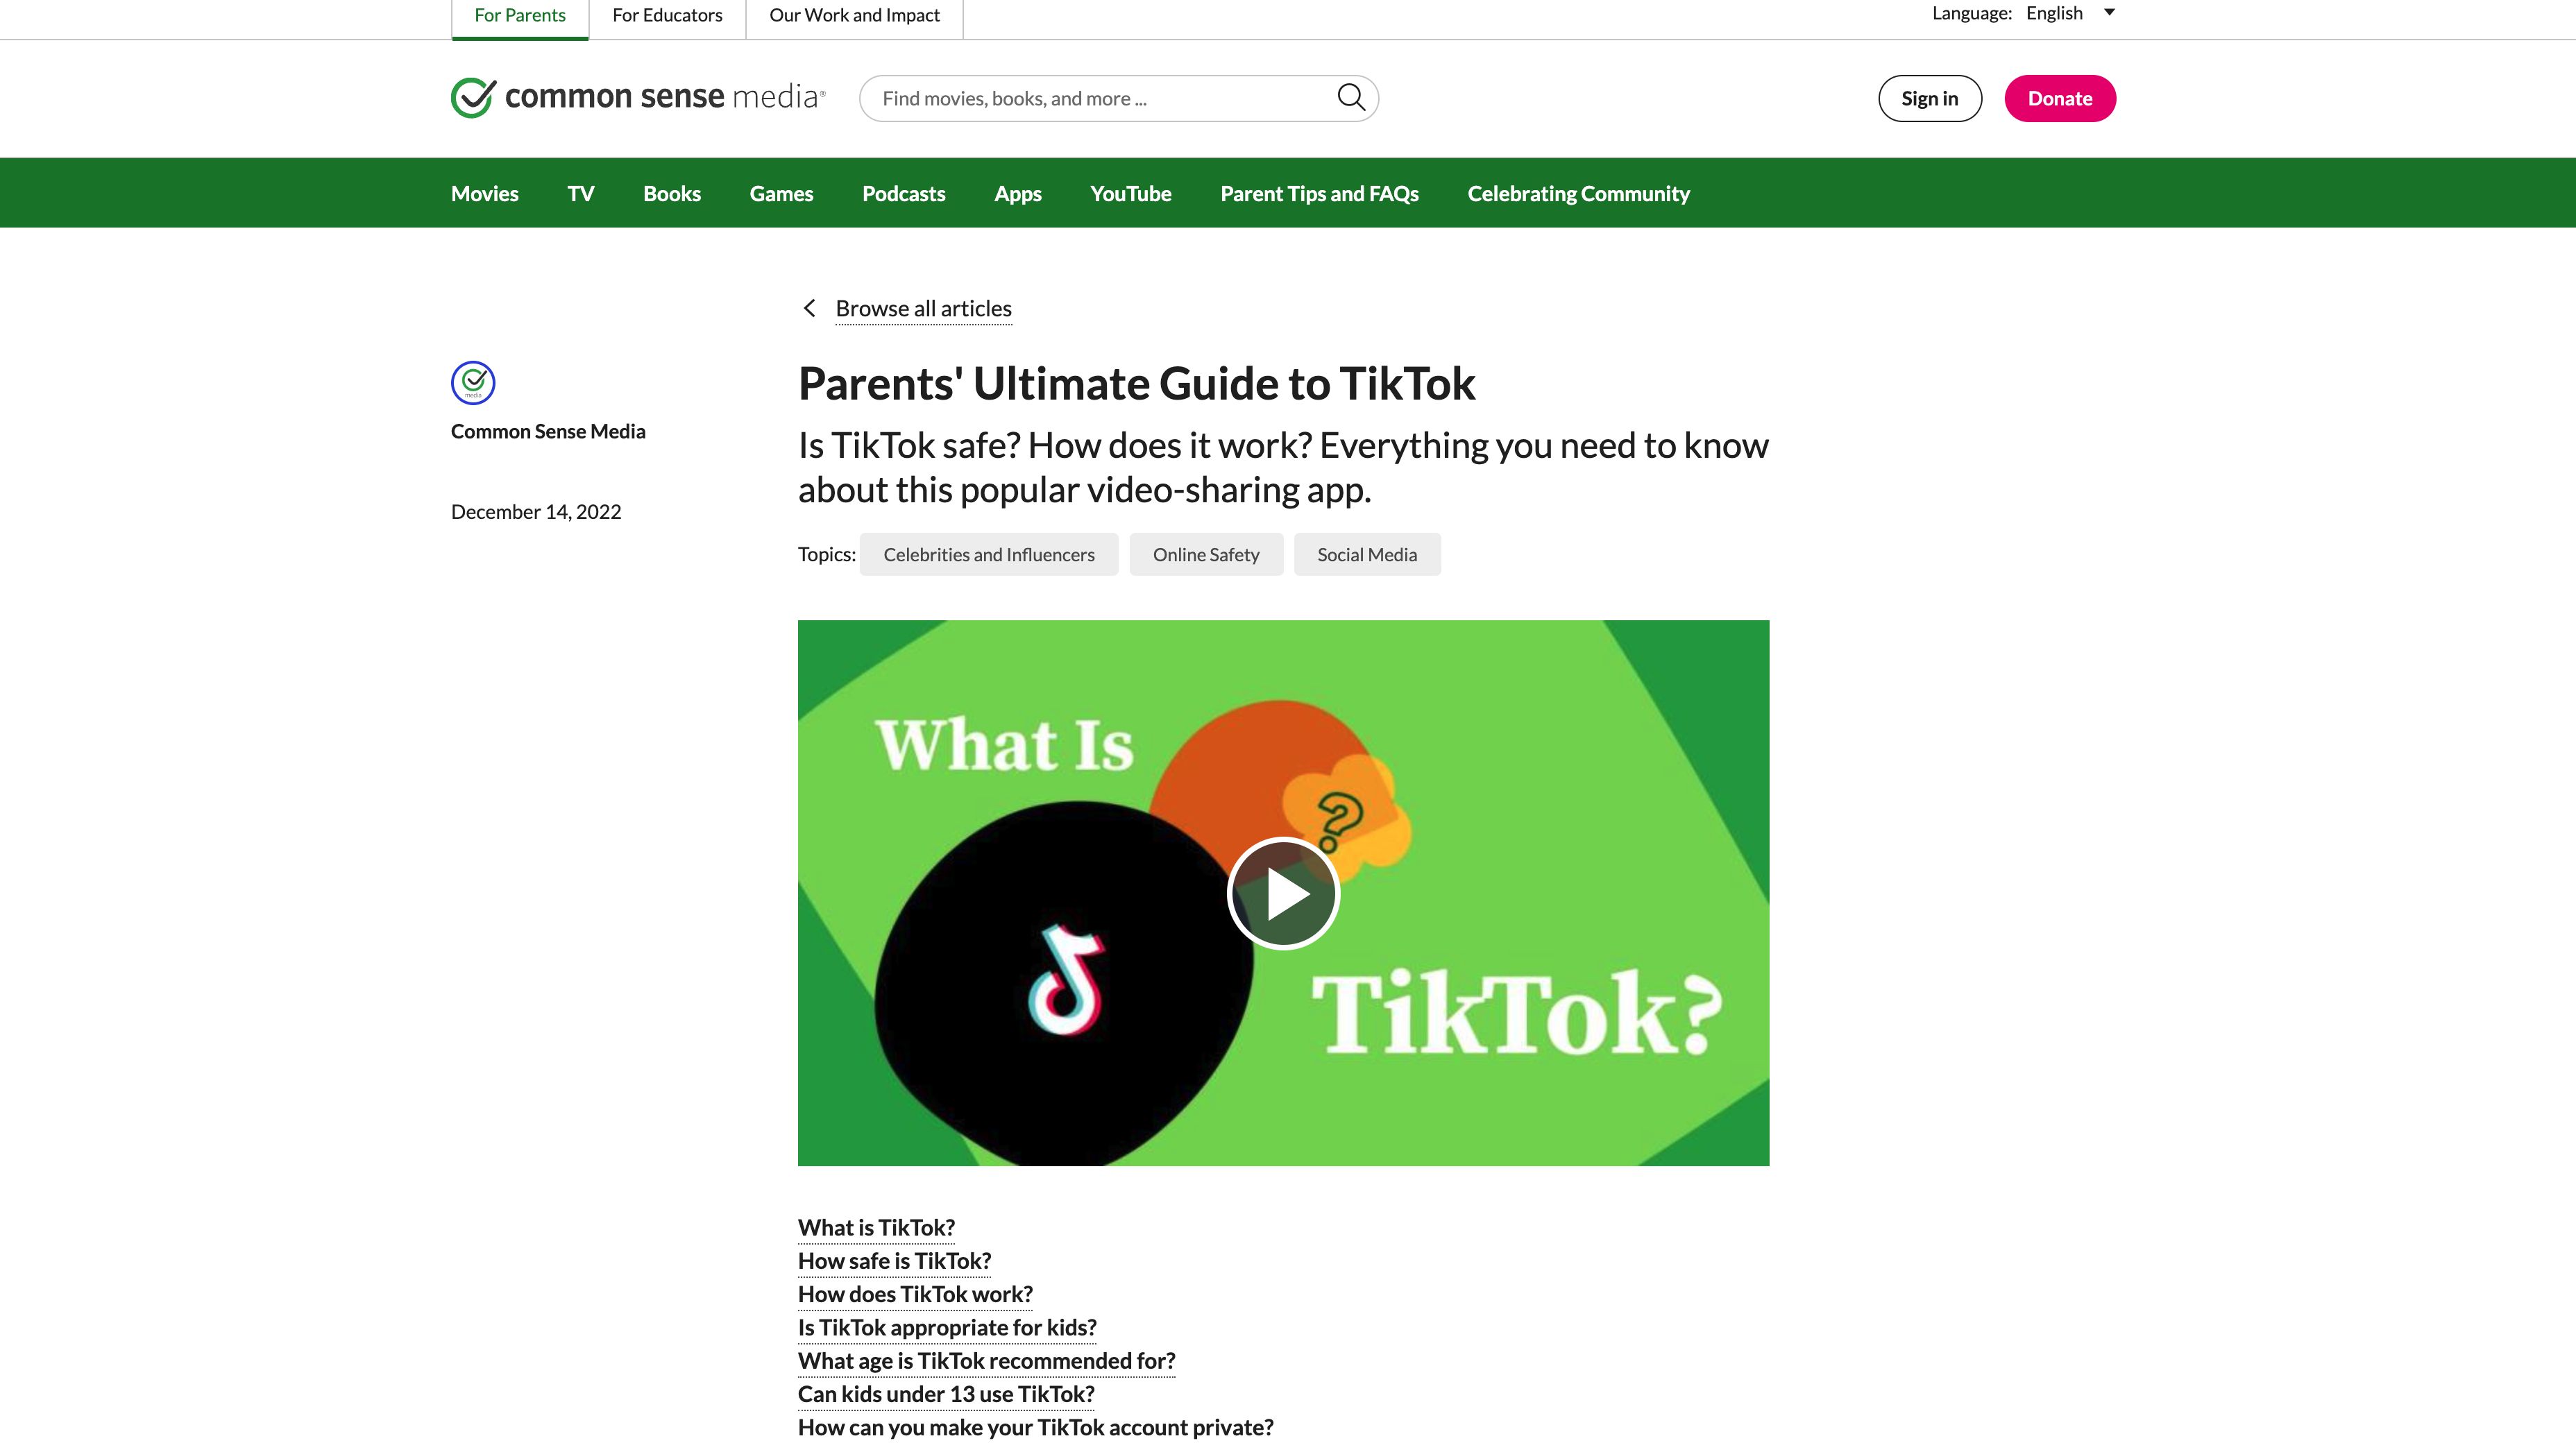 Parents Ultimate Guide to TikTok